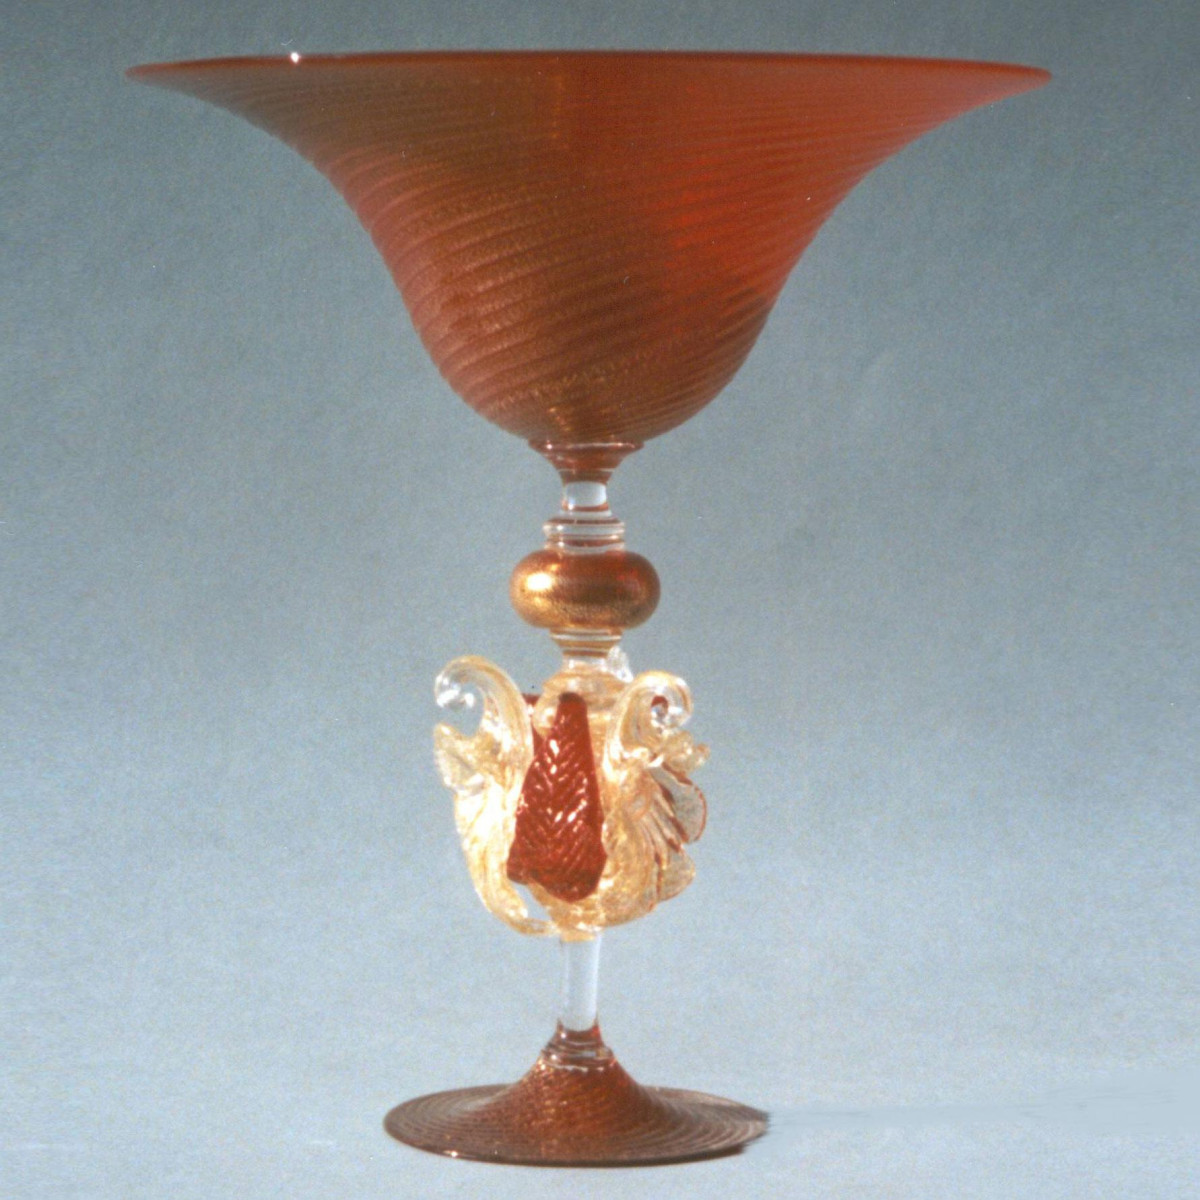 "Ornato" Murano glass fruitstand - red with gold details